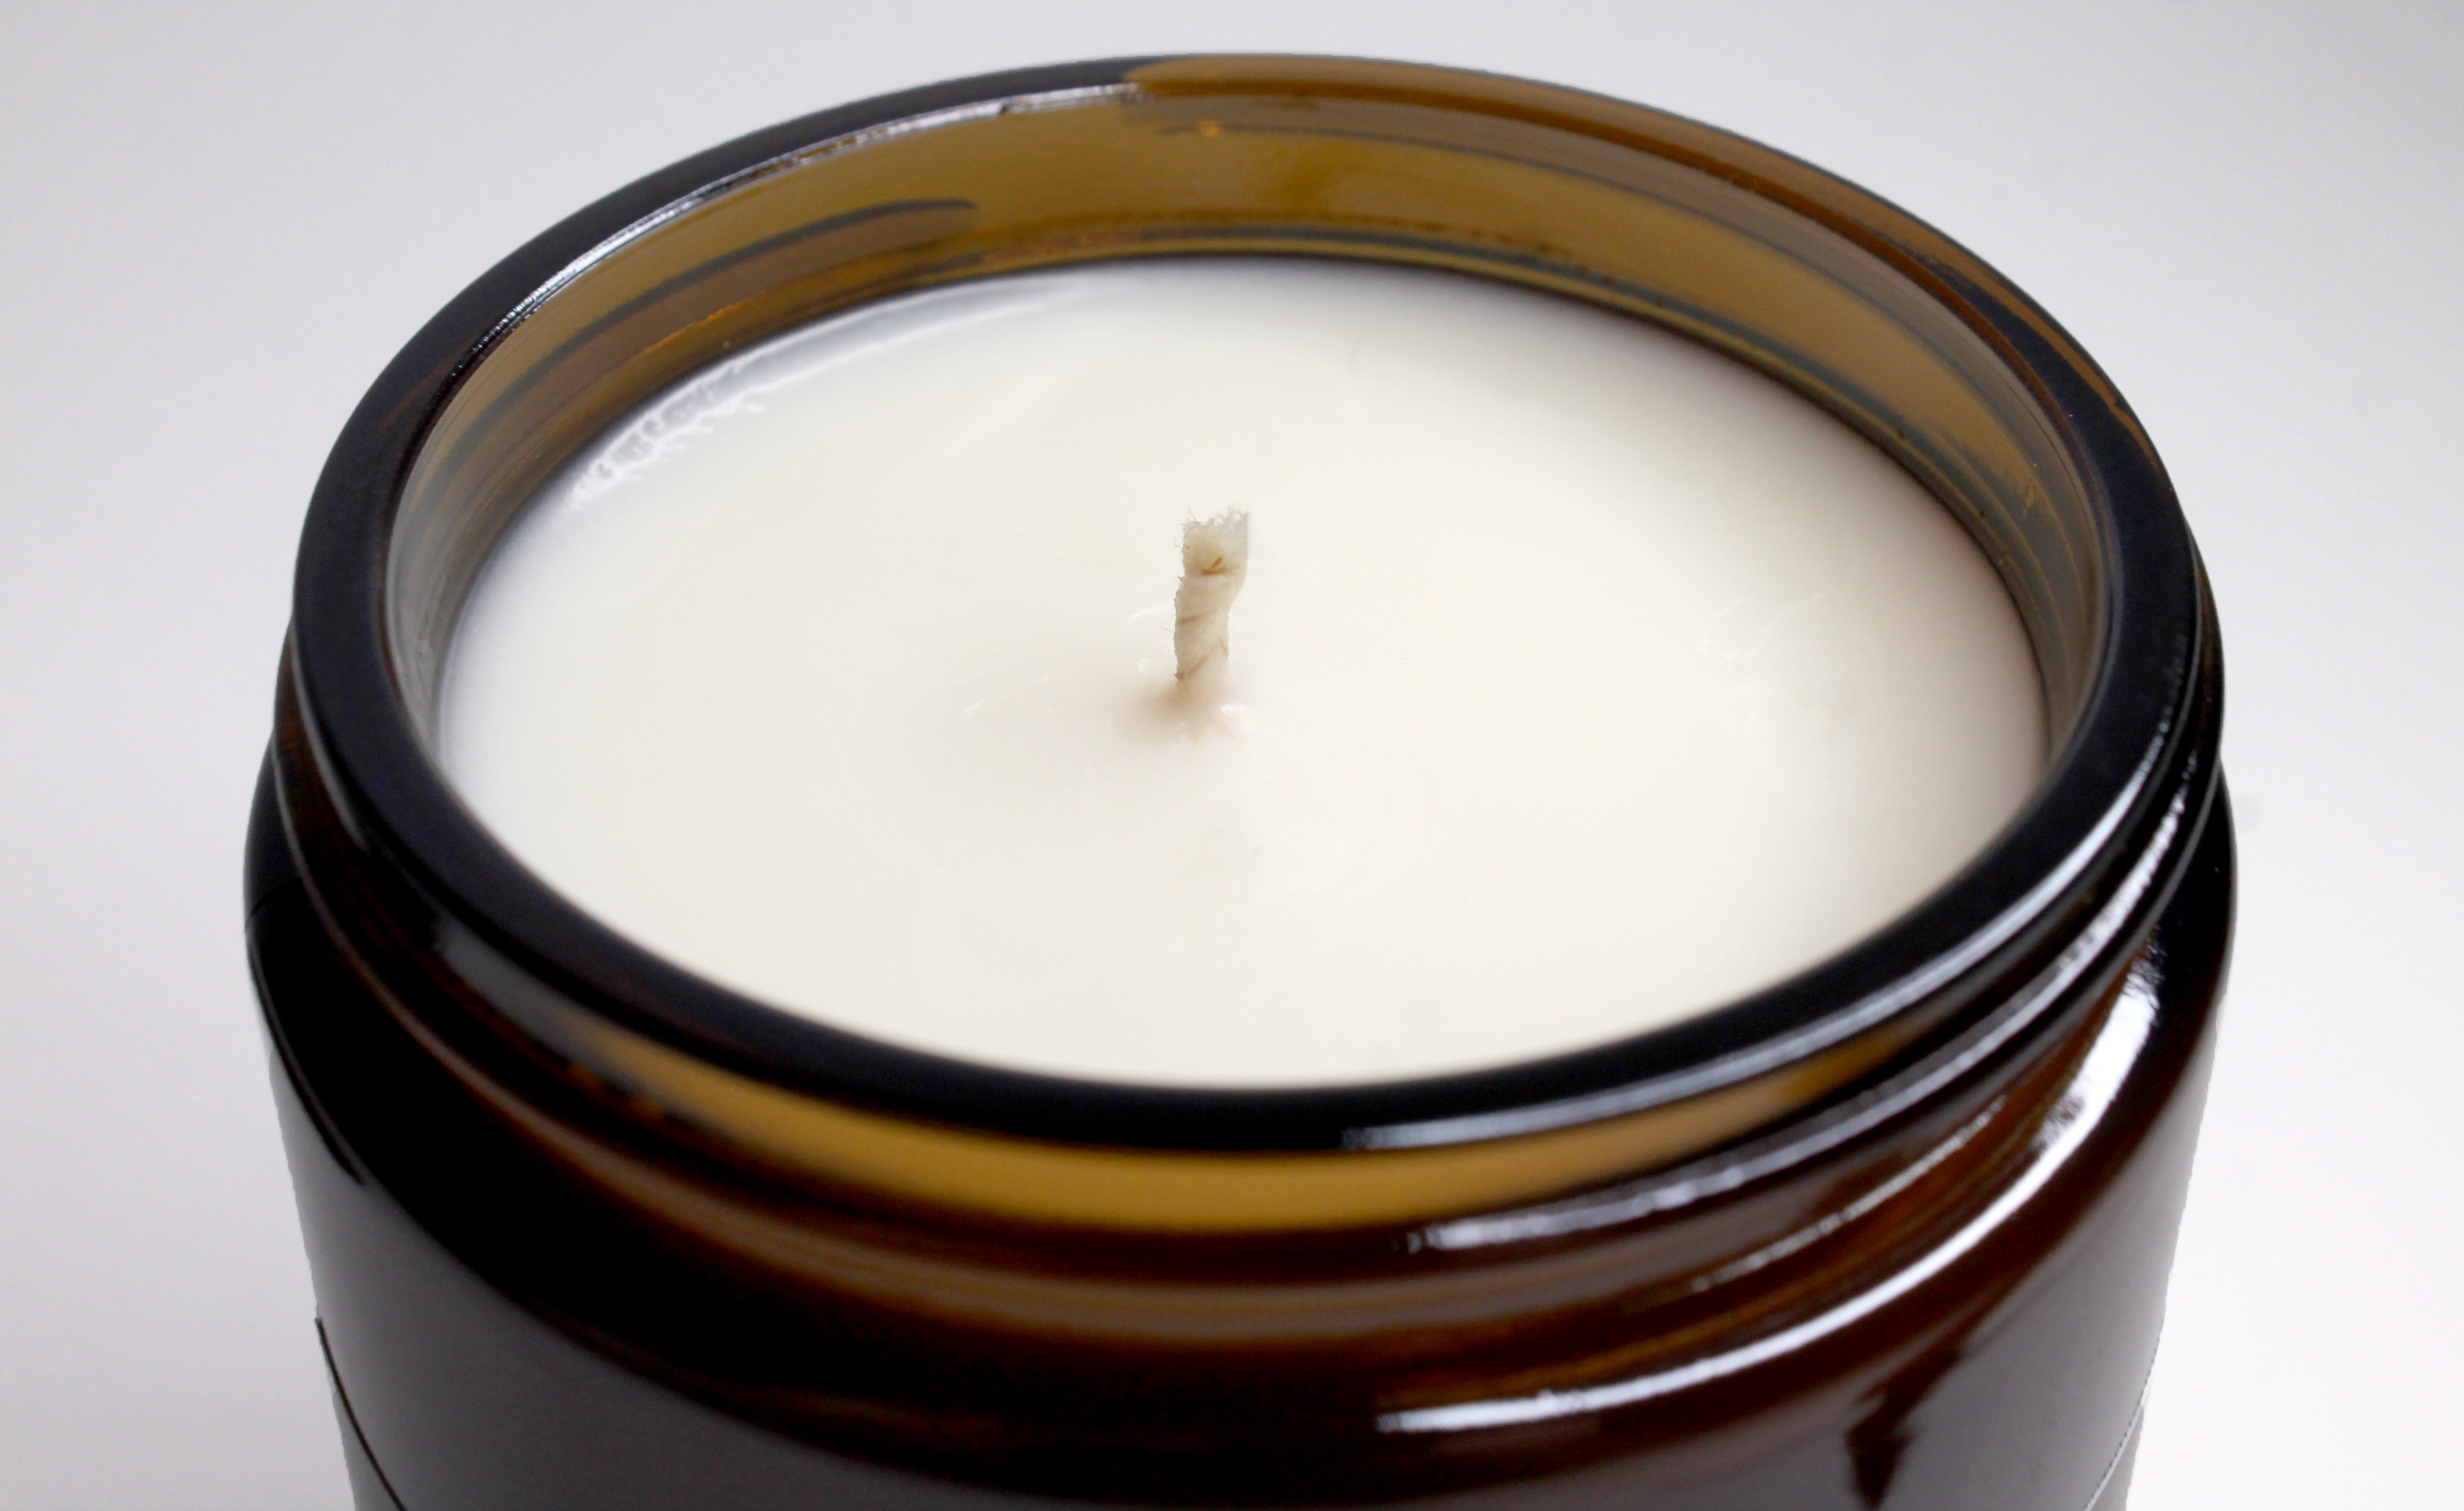 8 ounce cotton wick candle in the scent of mahogany and coconut. In an 8 ounce amber glass jar.